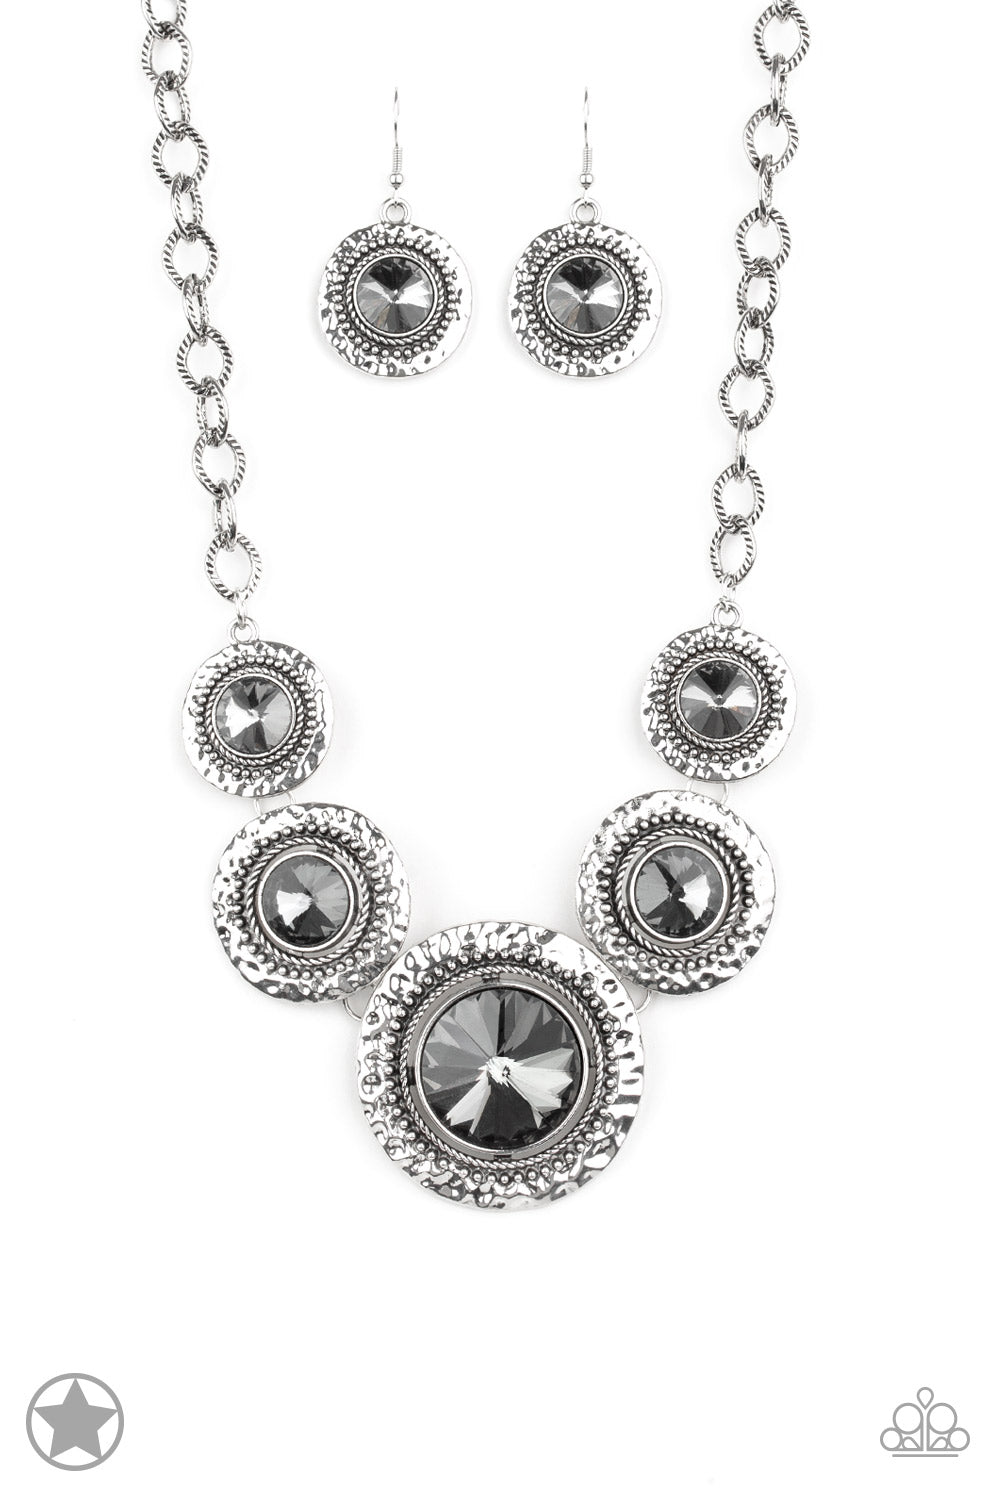 Global Glamour - Silver - Blockbuster - Paparazzi Accessories